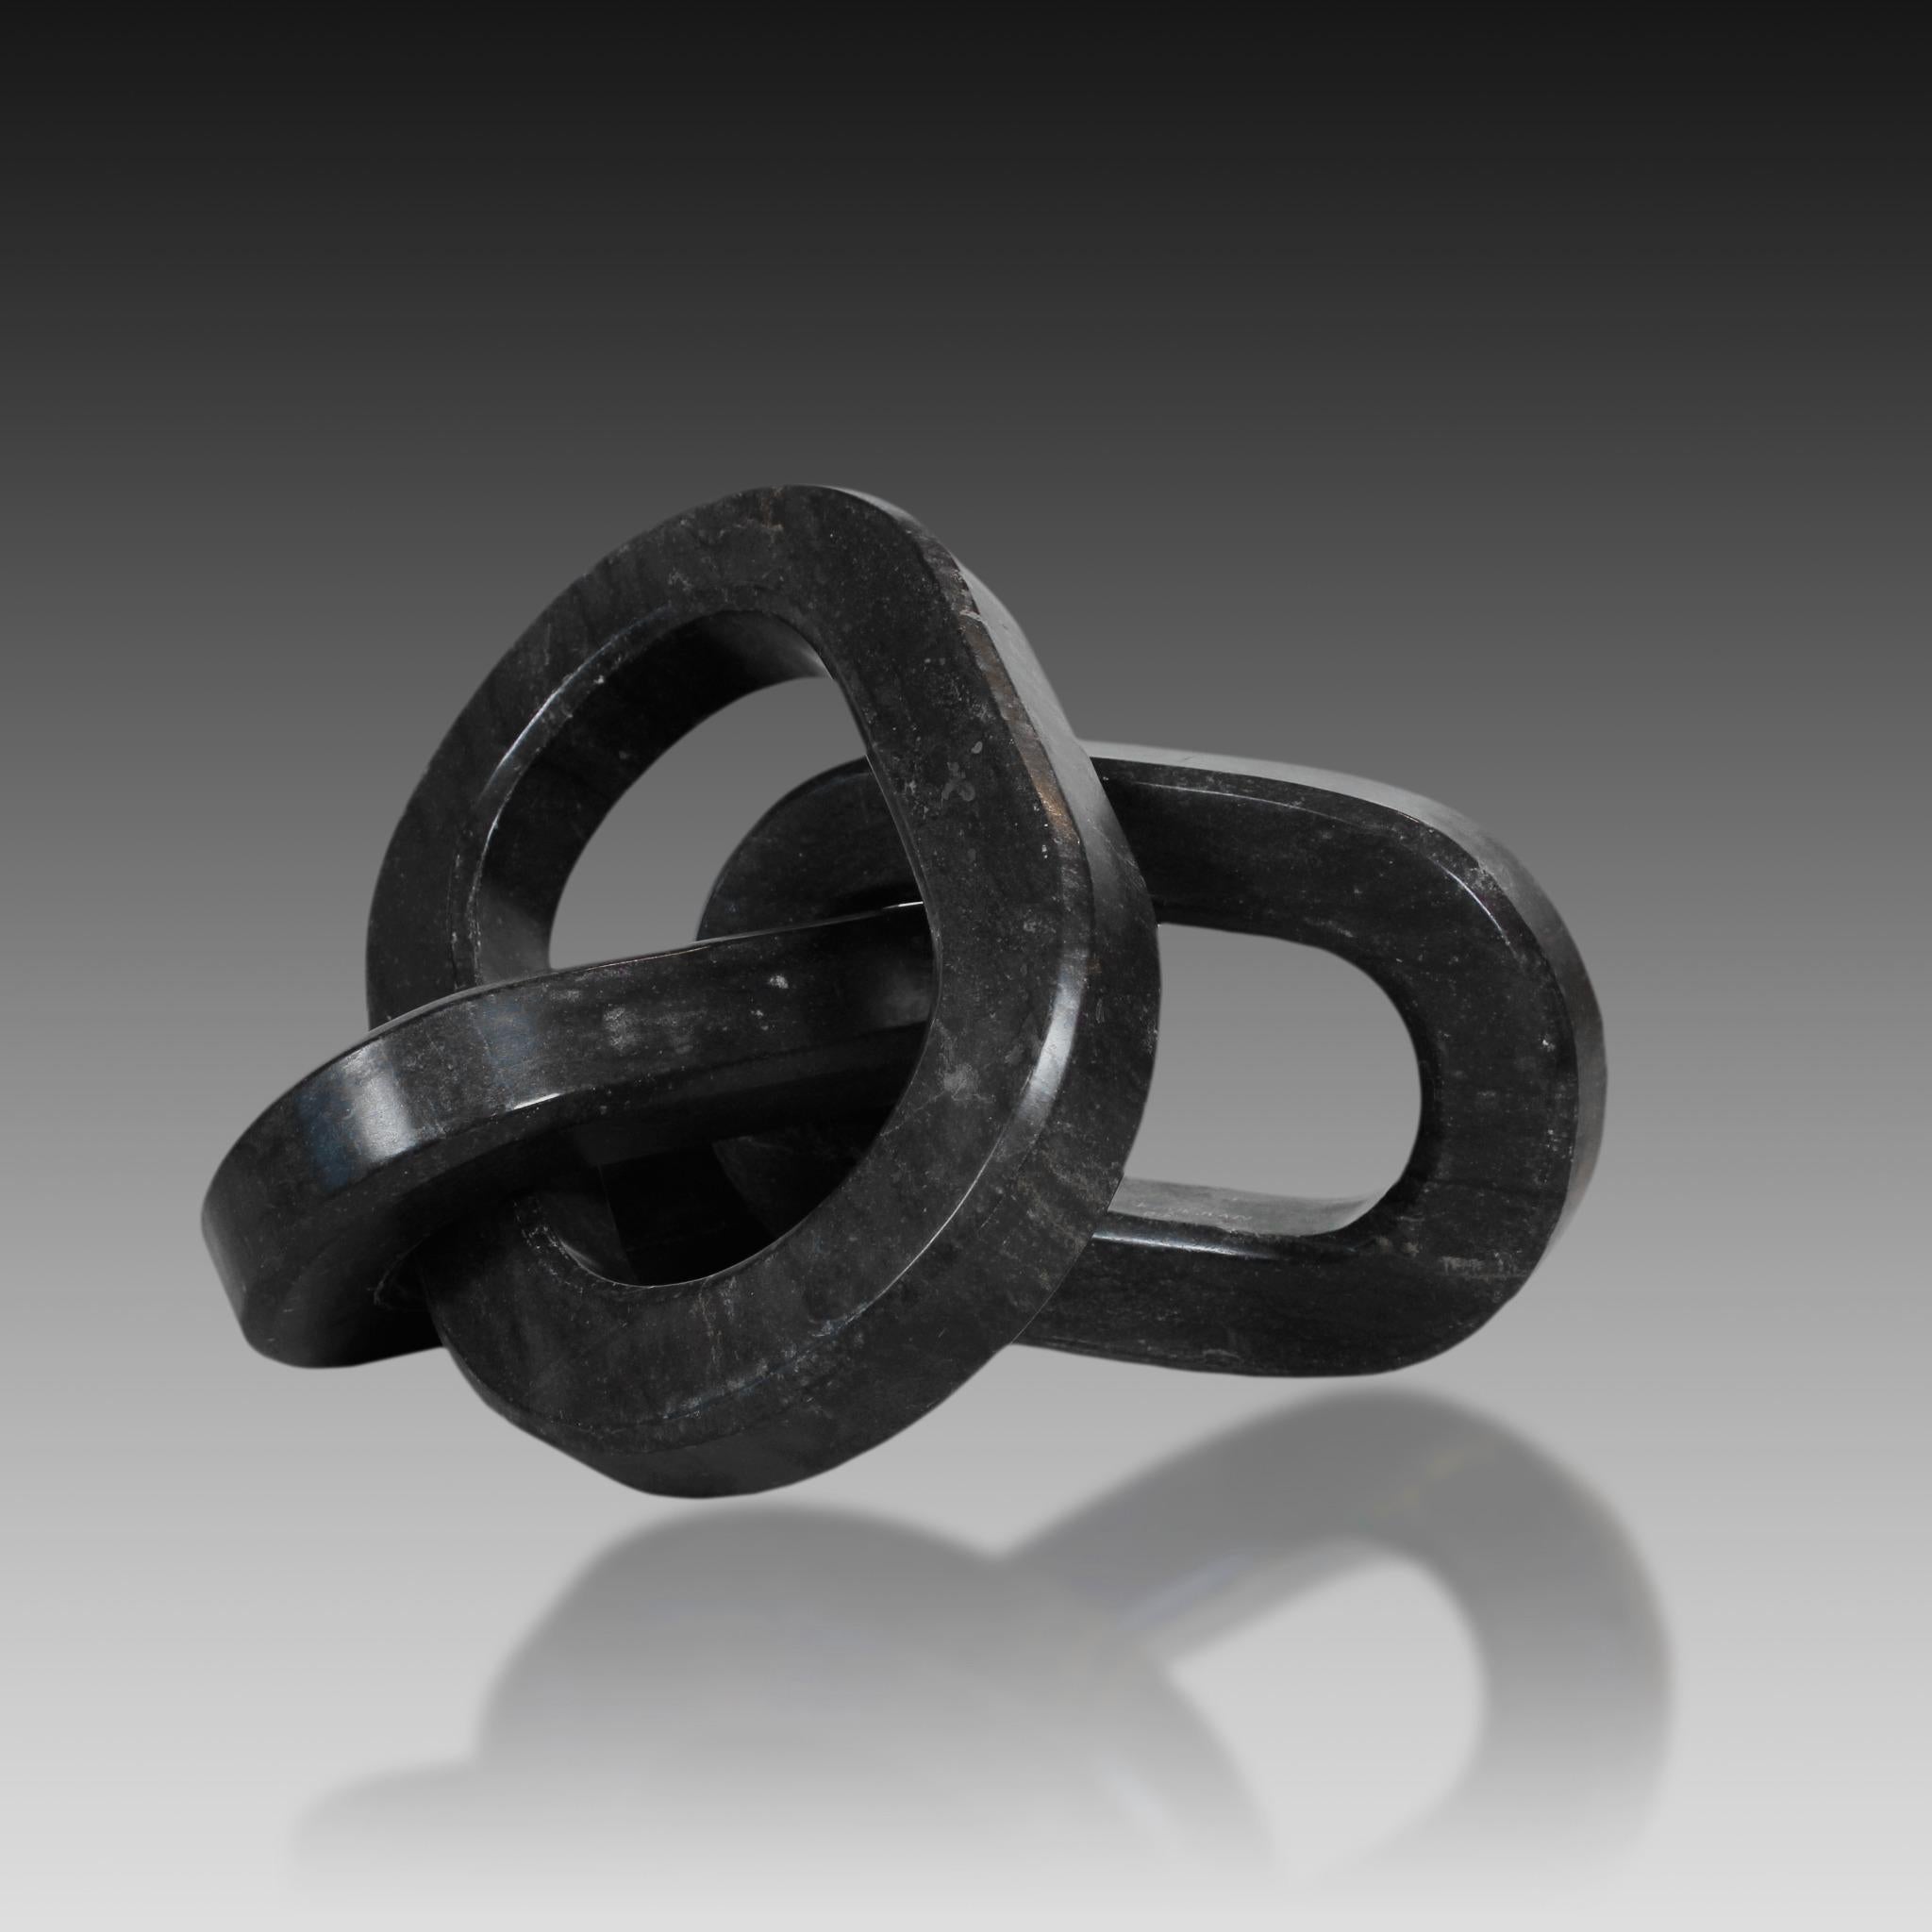 Cedric Koukjian Abstract Sculpture - Black Marble “LIAISON” with 3 links, Hand Carved Marble Sculpture 